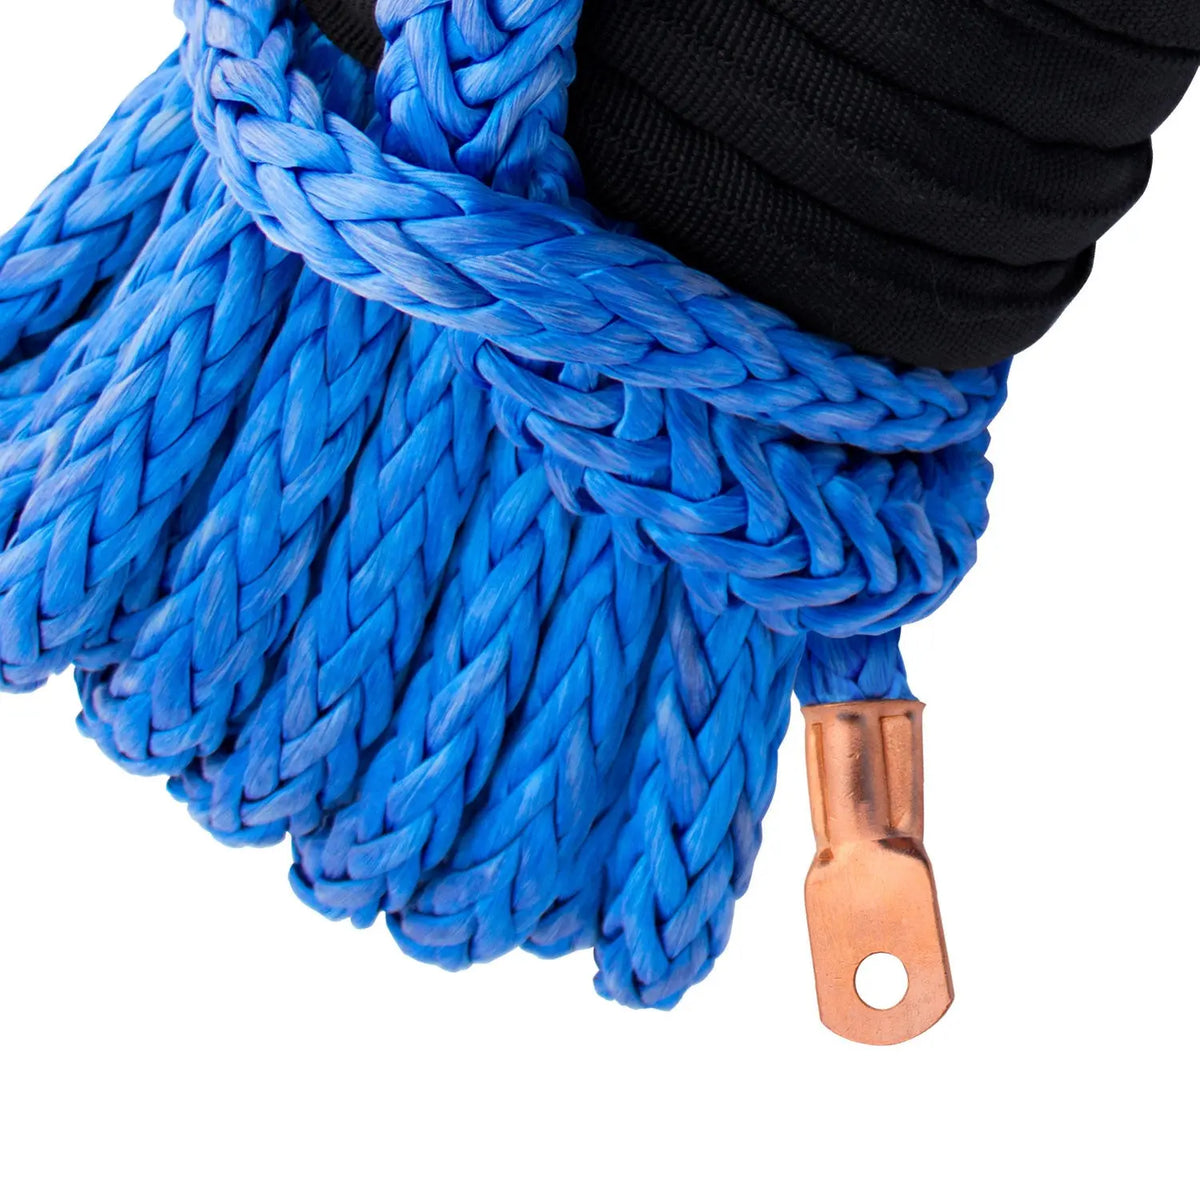 5/16" Diamond Line Winch Rope Mainline - Crimped End for Winch Attachment. 